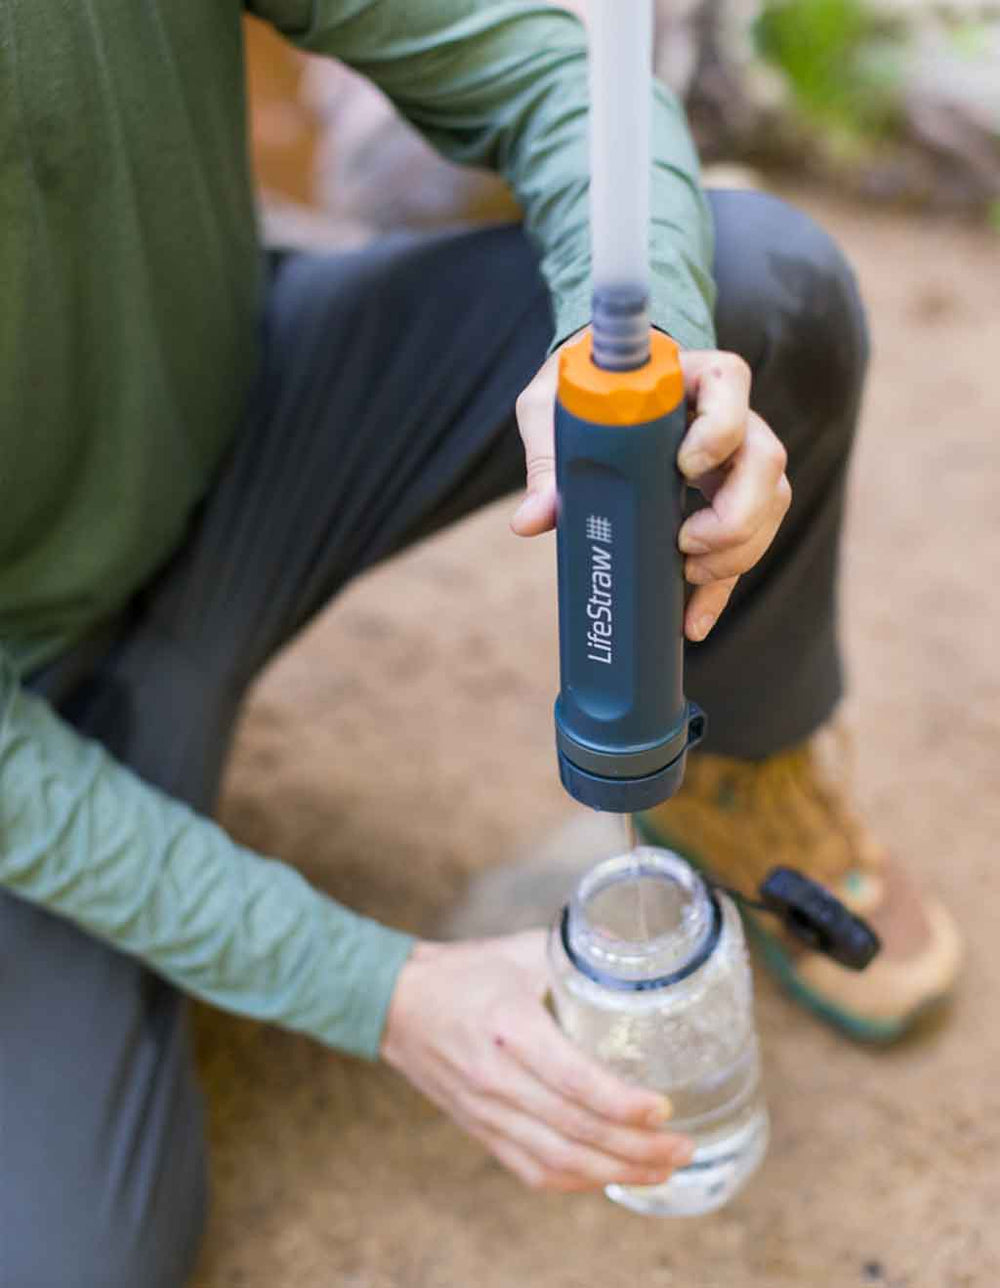 The LifeStraw explained: How it filters water and eradicates disease 